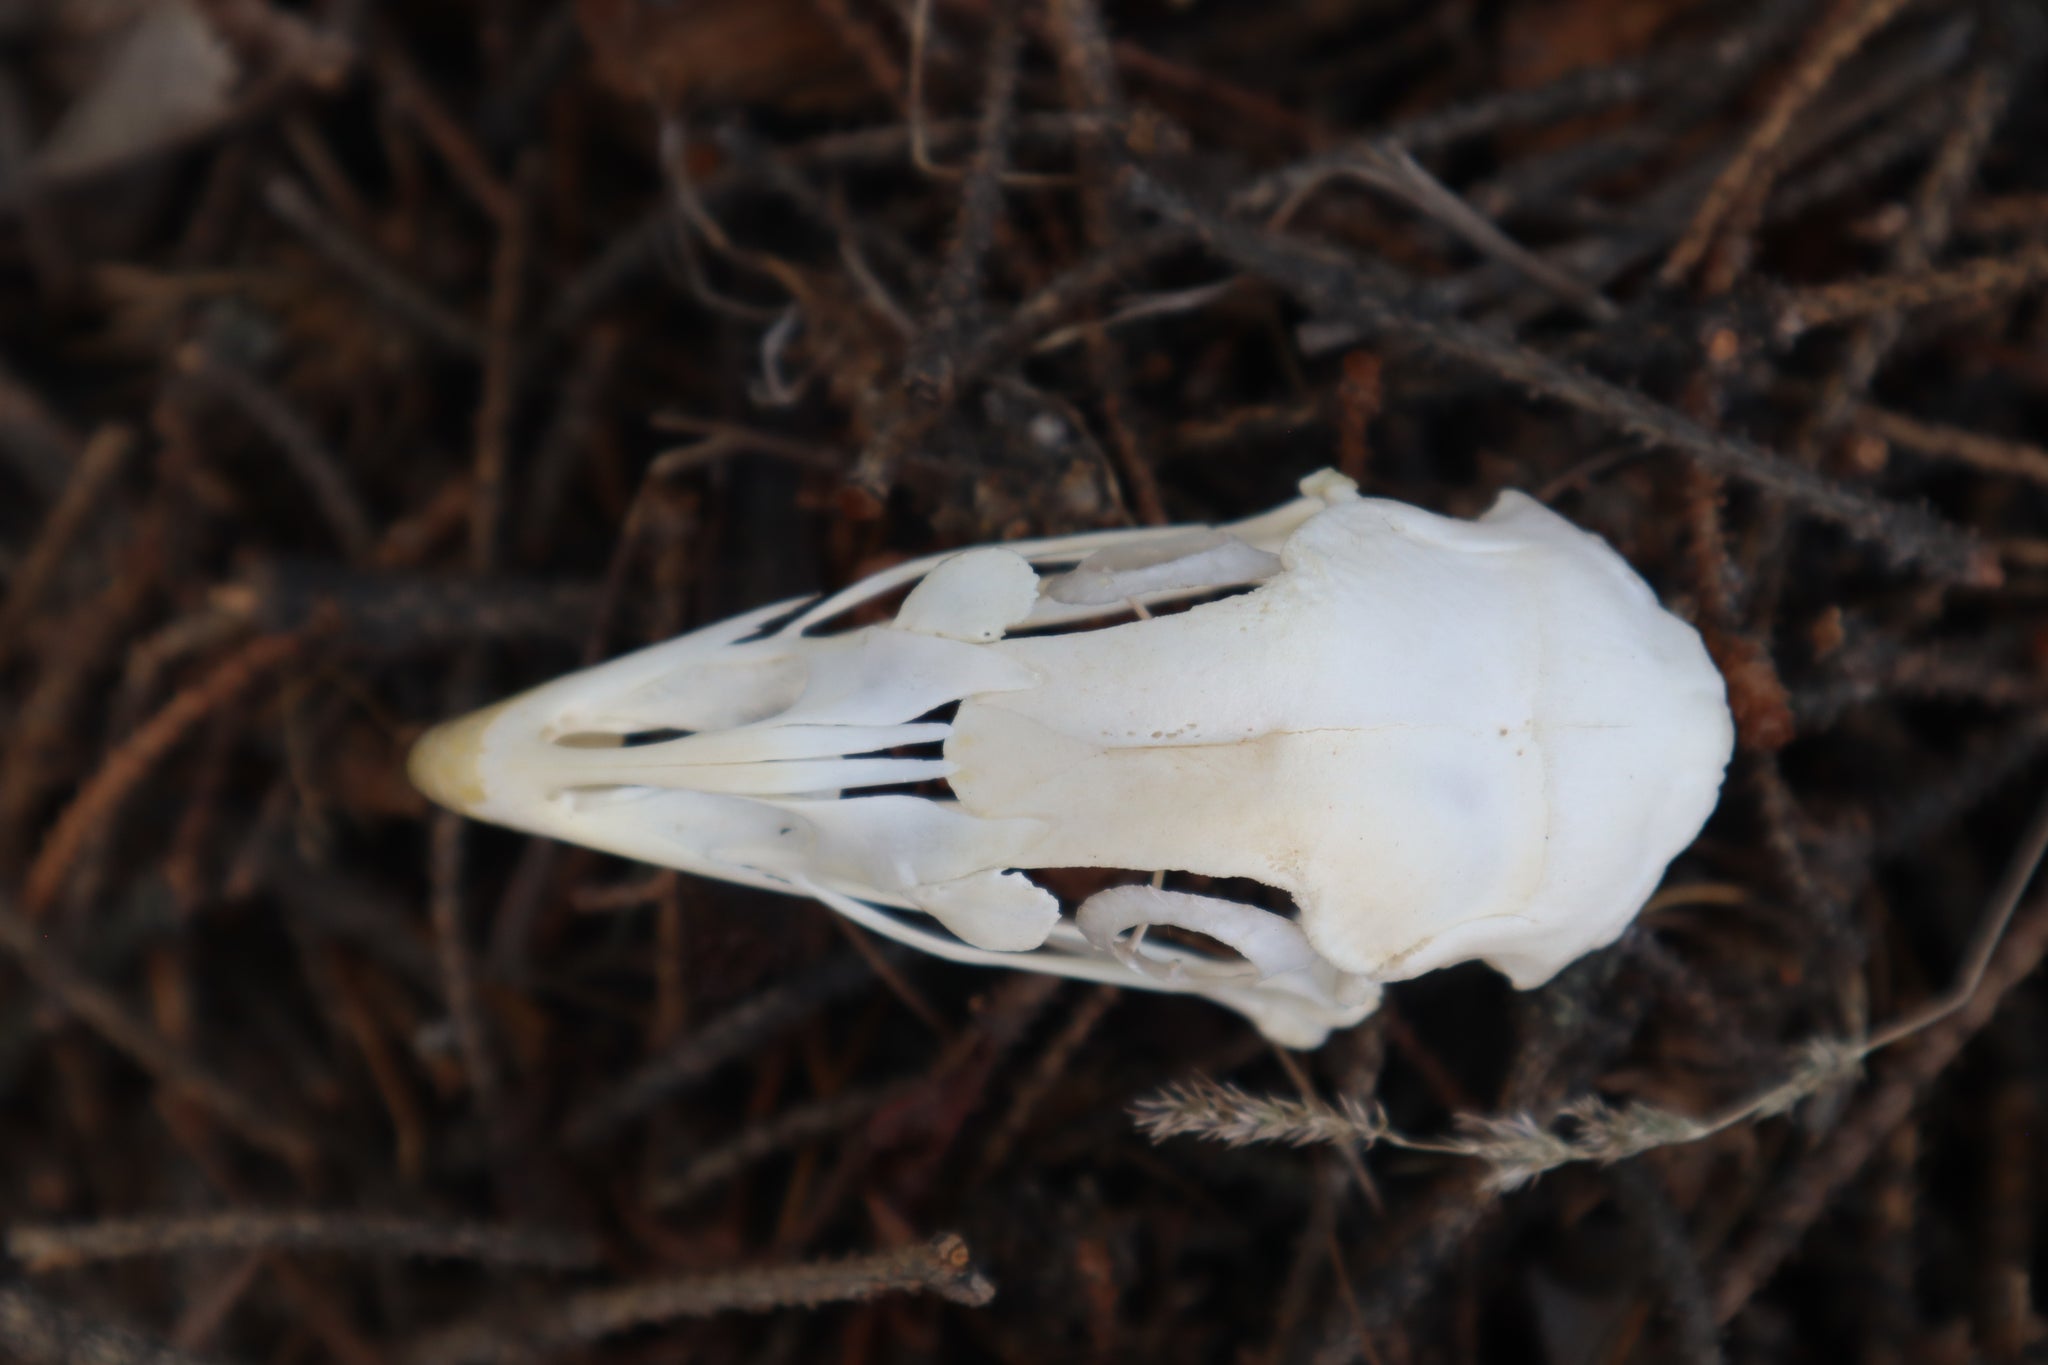 Chicken Skull with Sclerotic Rings